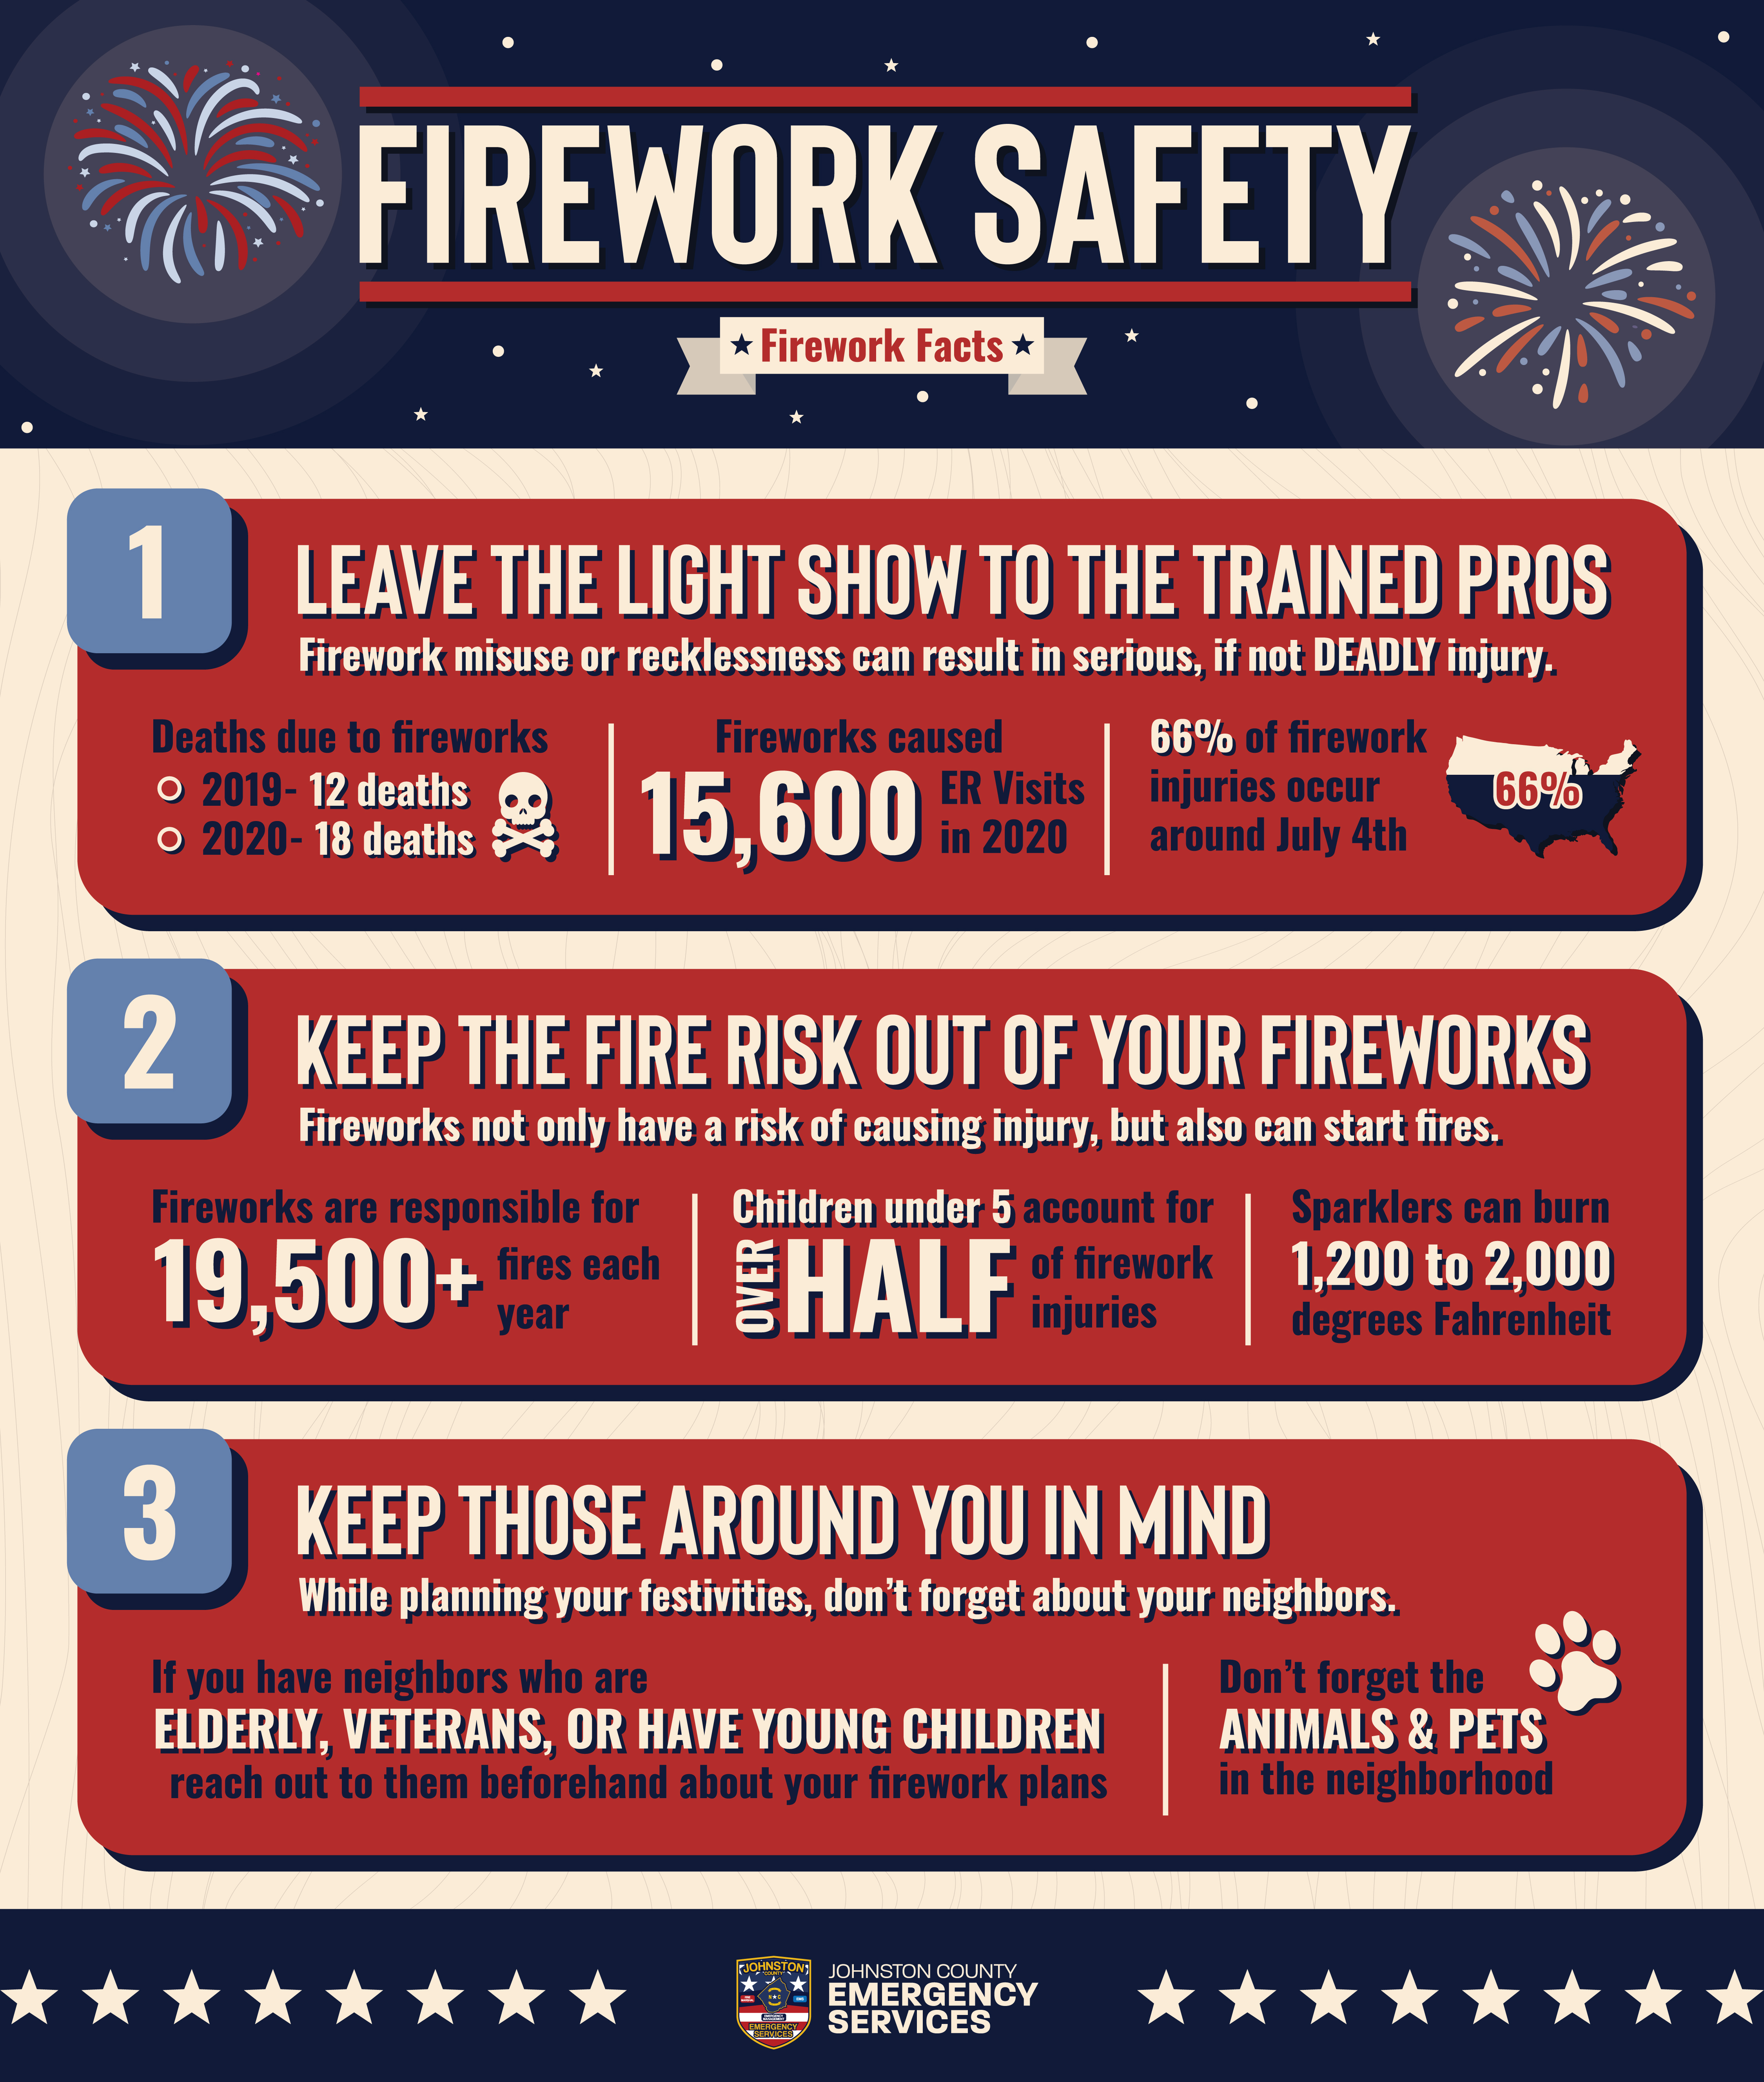 Firework safety facts brochure